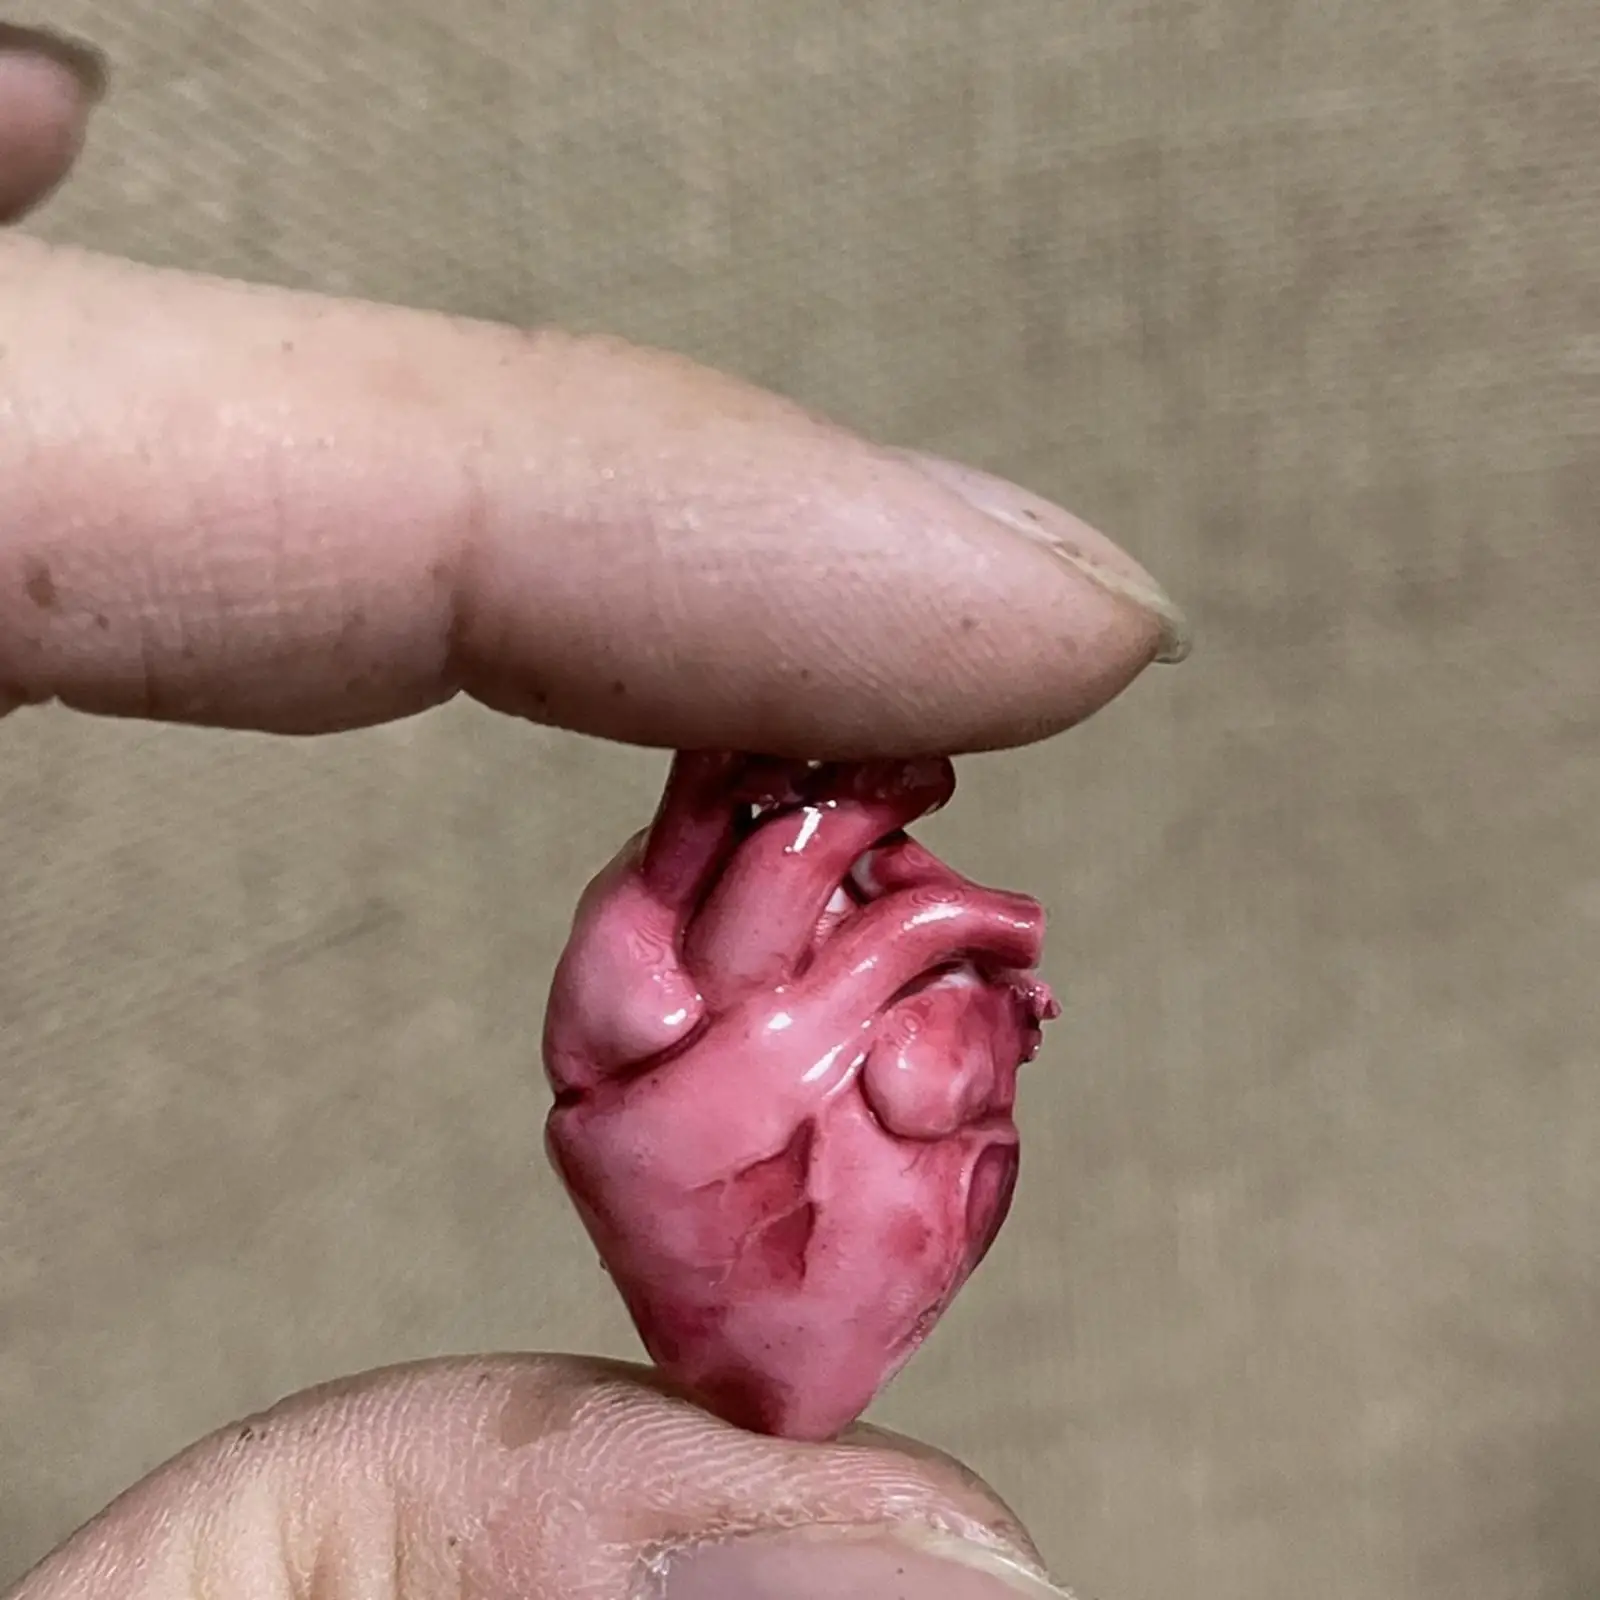 1/18 Scale Resin Heart Model Fine Workmanship Photo Prop Scene Decoration Toy for Kids Adults for 3.75in Action Figures Diorama